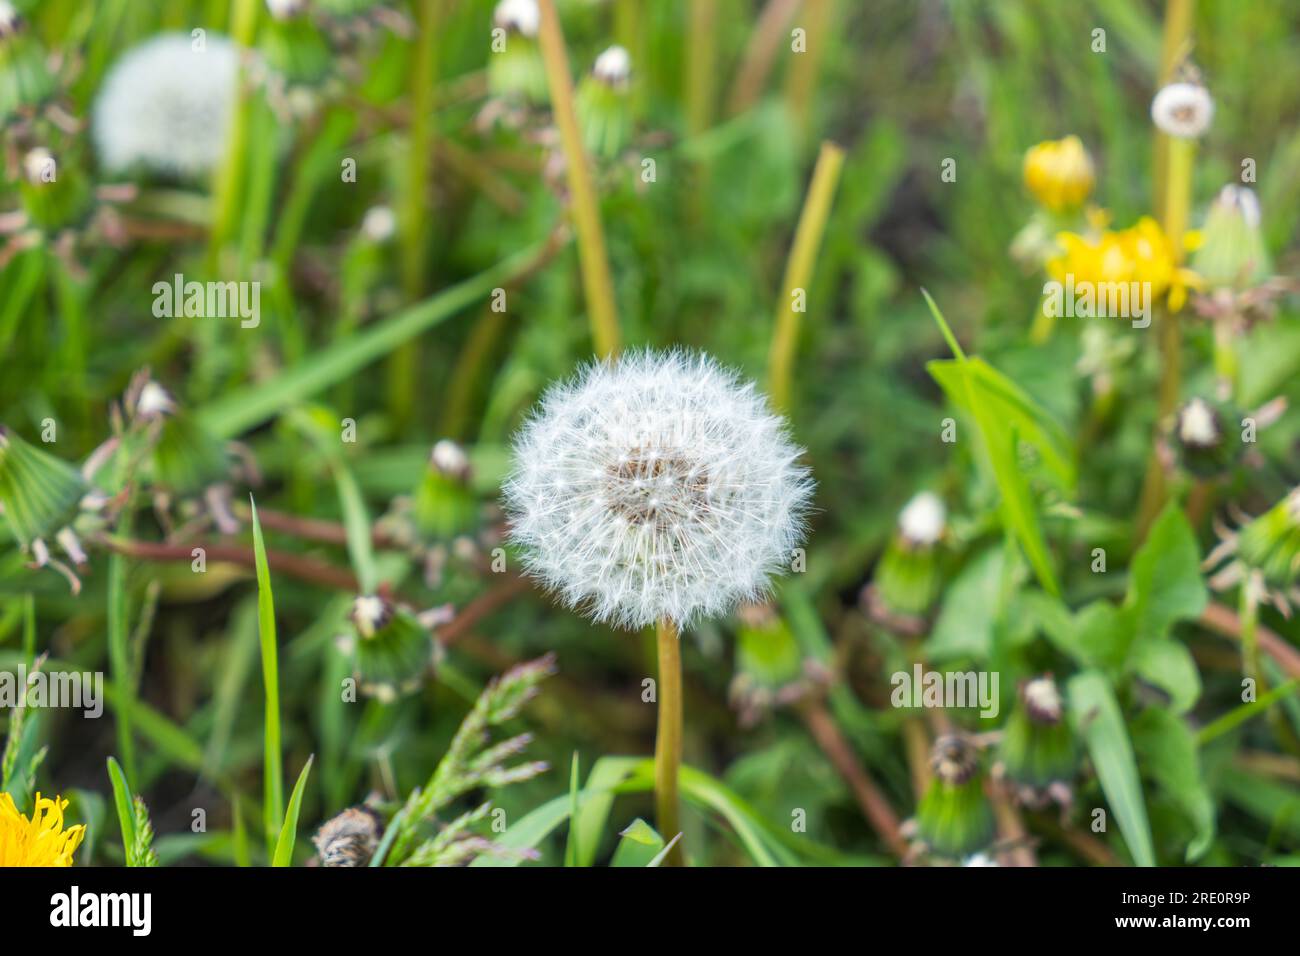 Some small yellow flowers, white dandelions and Phleum pratense. St. Moritz Retreat: Capturing the Scenic Landscapes of a Swiss Vacation Town. Stock Photo